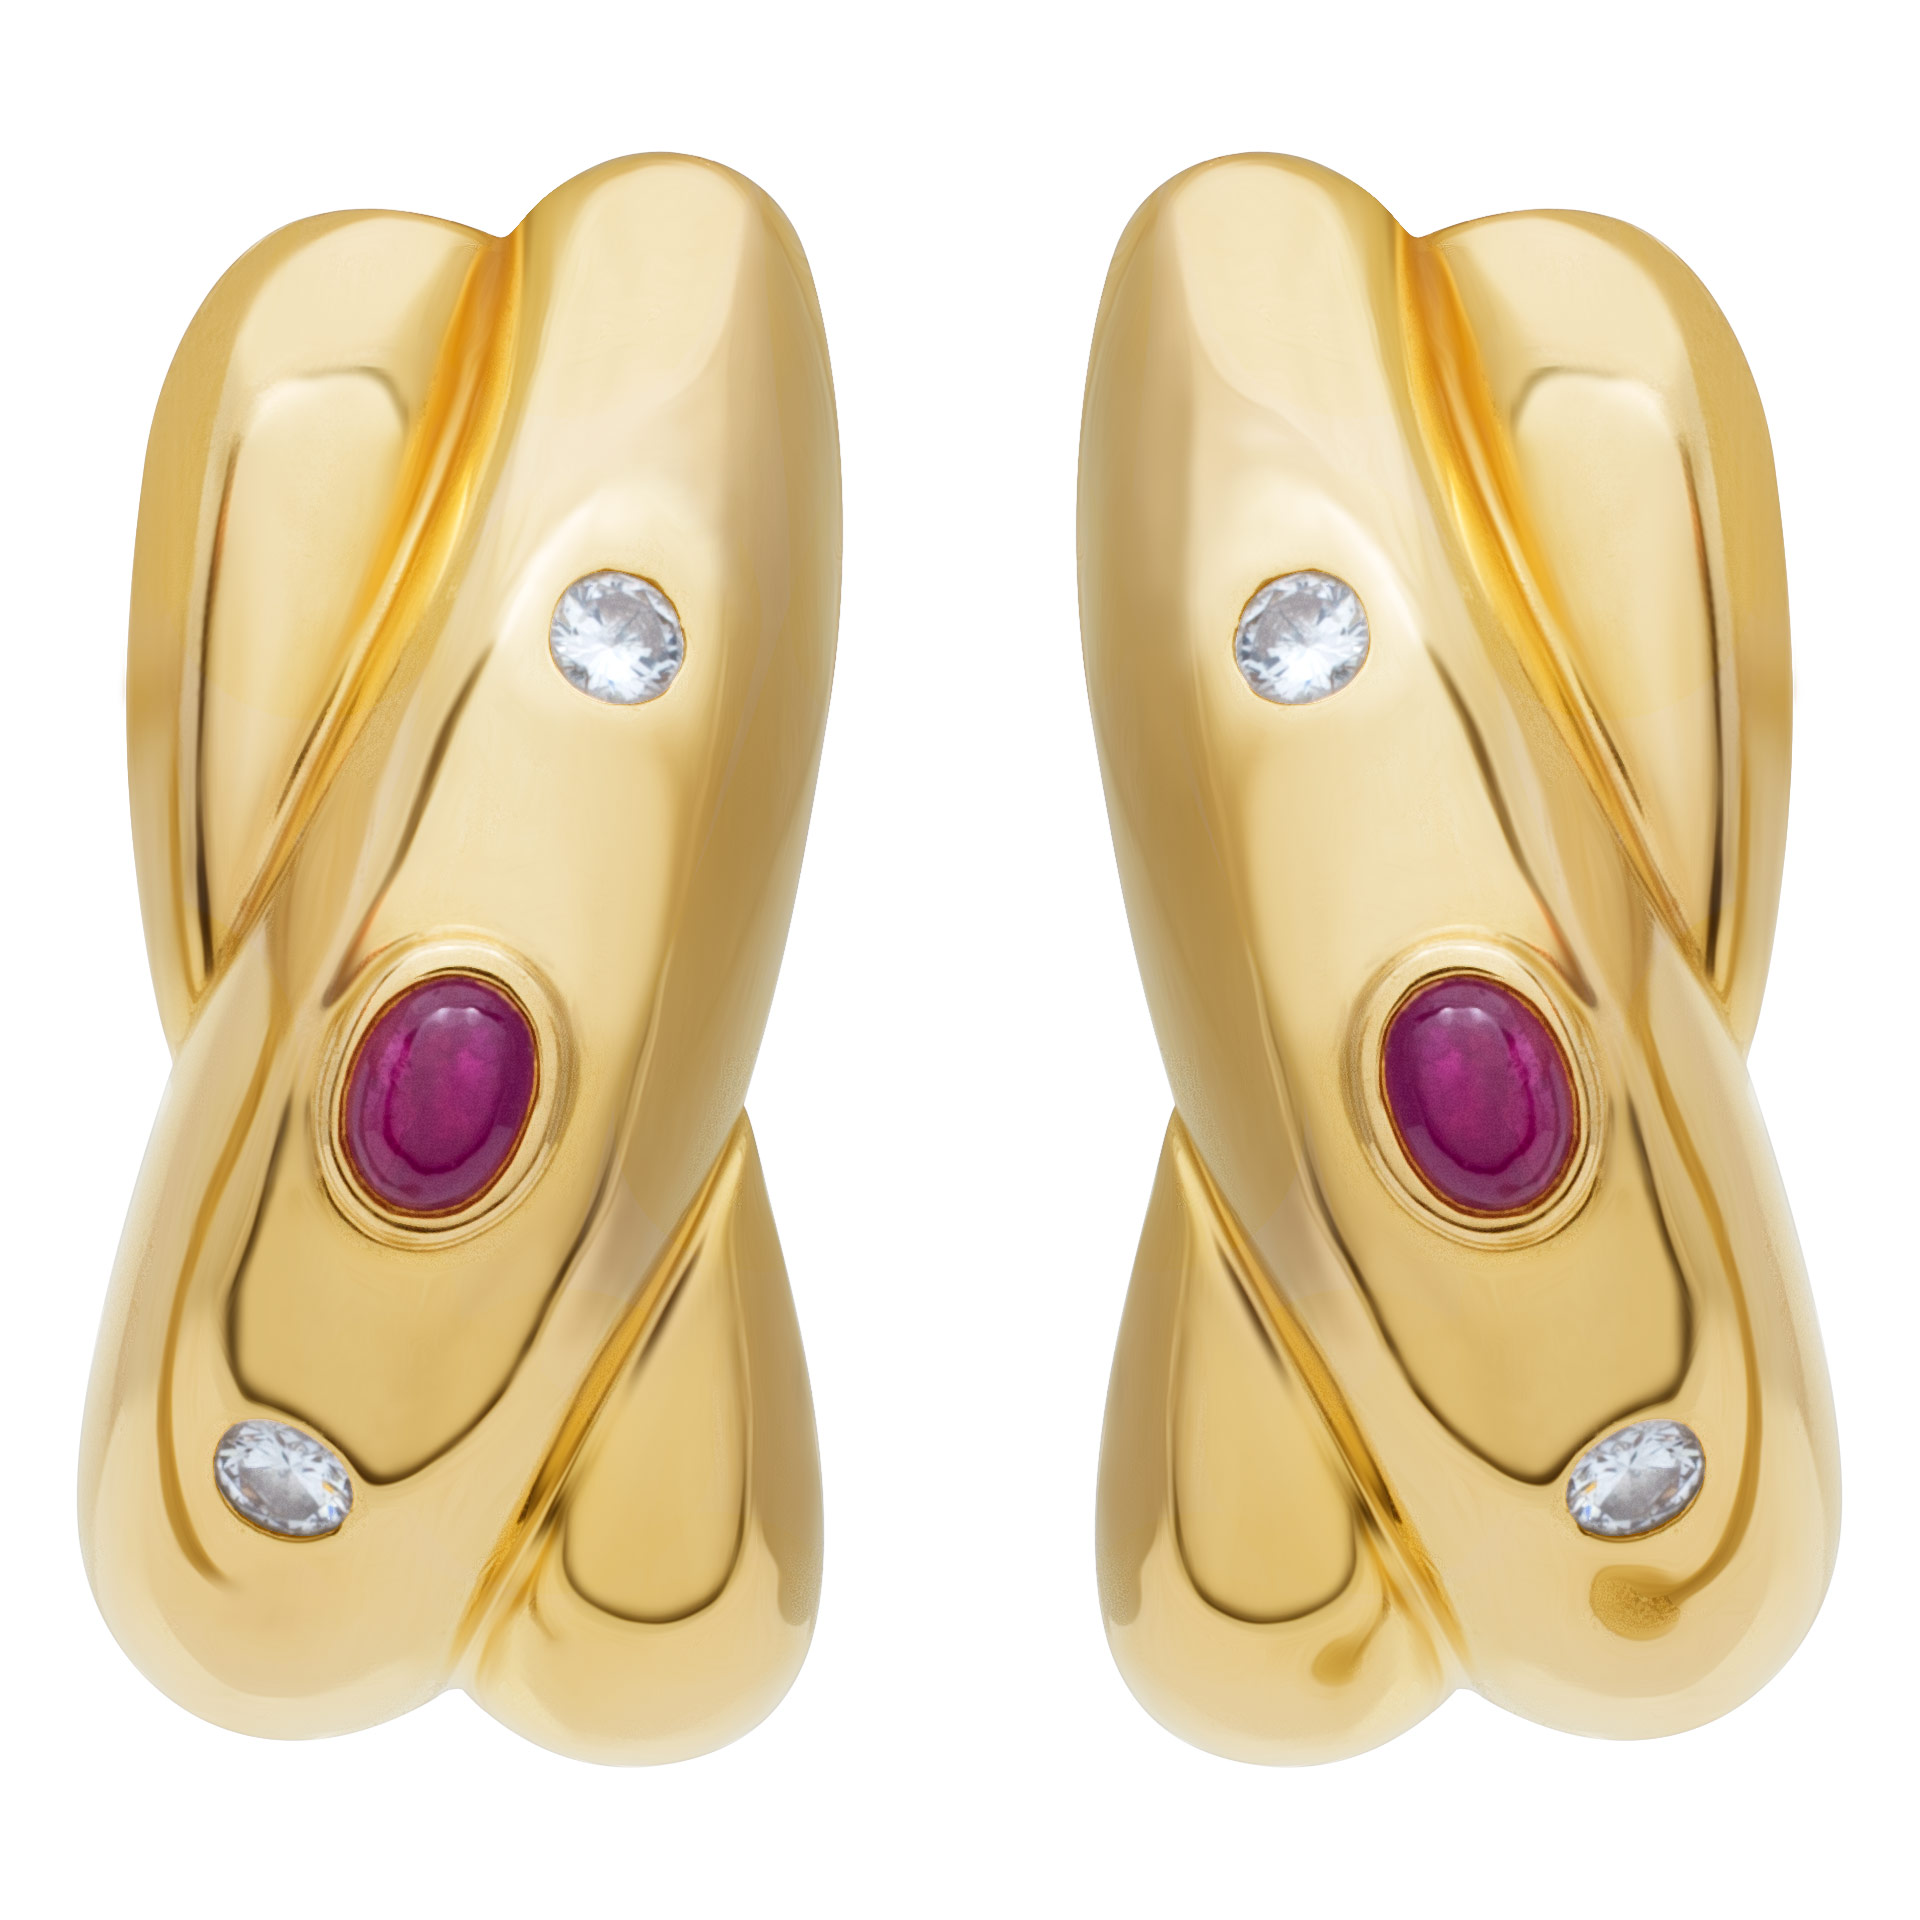 Cartier crossover 18K yellow gold earrings with diamond accents